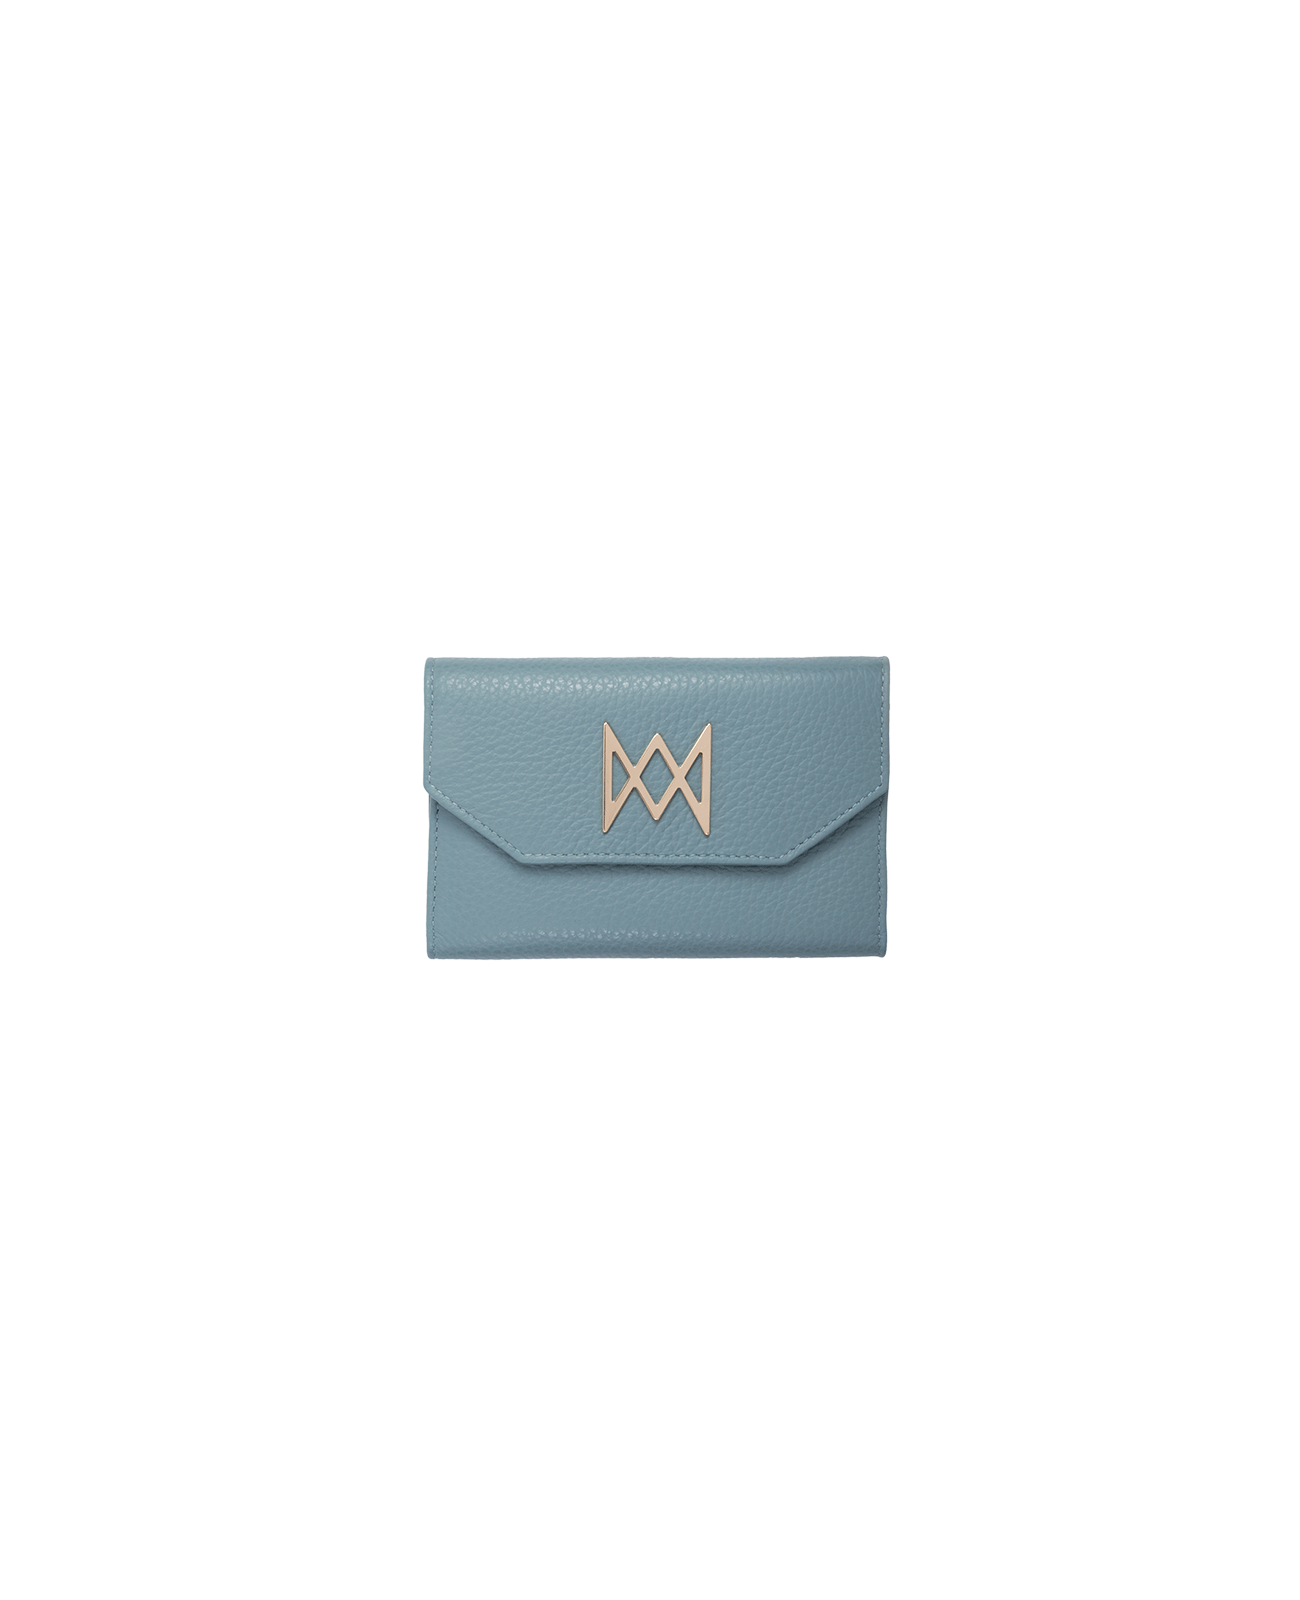 Wallet in Italian full-grain leather. Designed to carry your personal items. Available in a variety of styles and designs. Color: Avio. Size: Mini